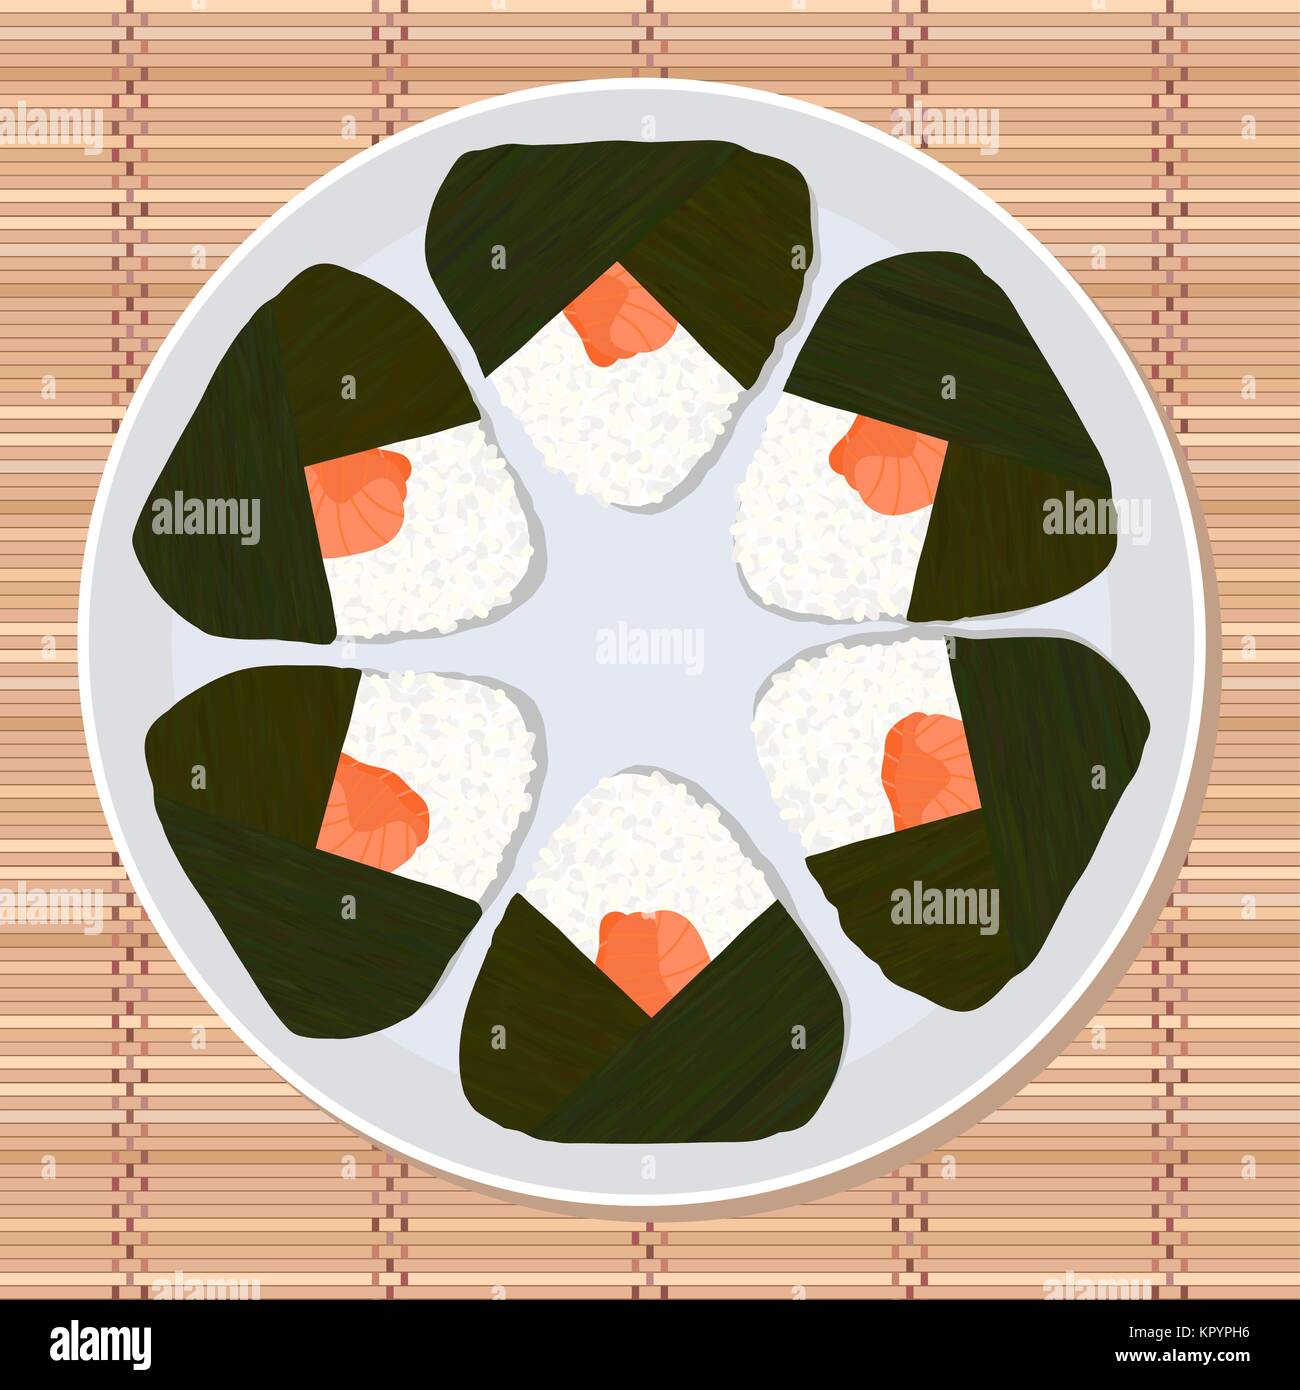 Onigiri (japanese rice ball) filled with salmon. Lunch texture. Japanese cuisine. Lunch Illustration. Asian snack plate on the japanese bamboo mat. Stock Vector